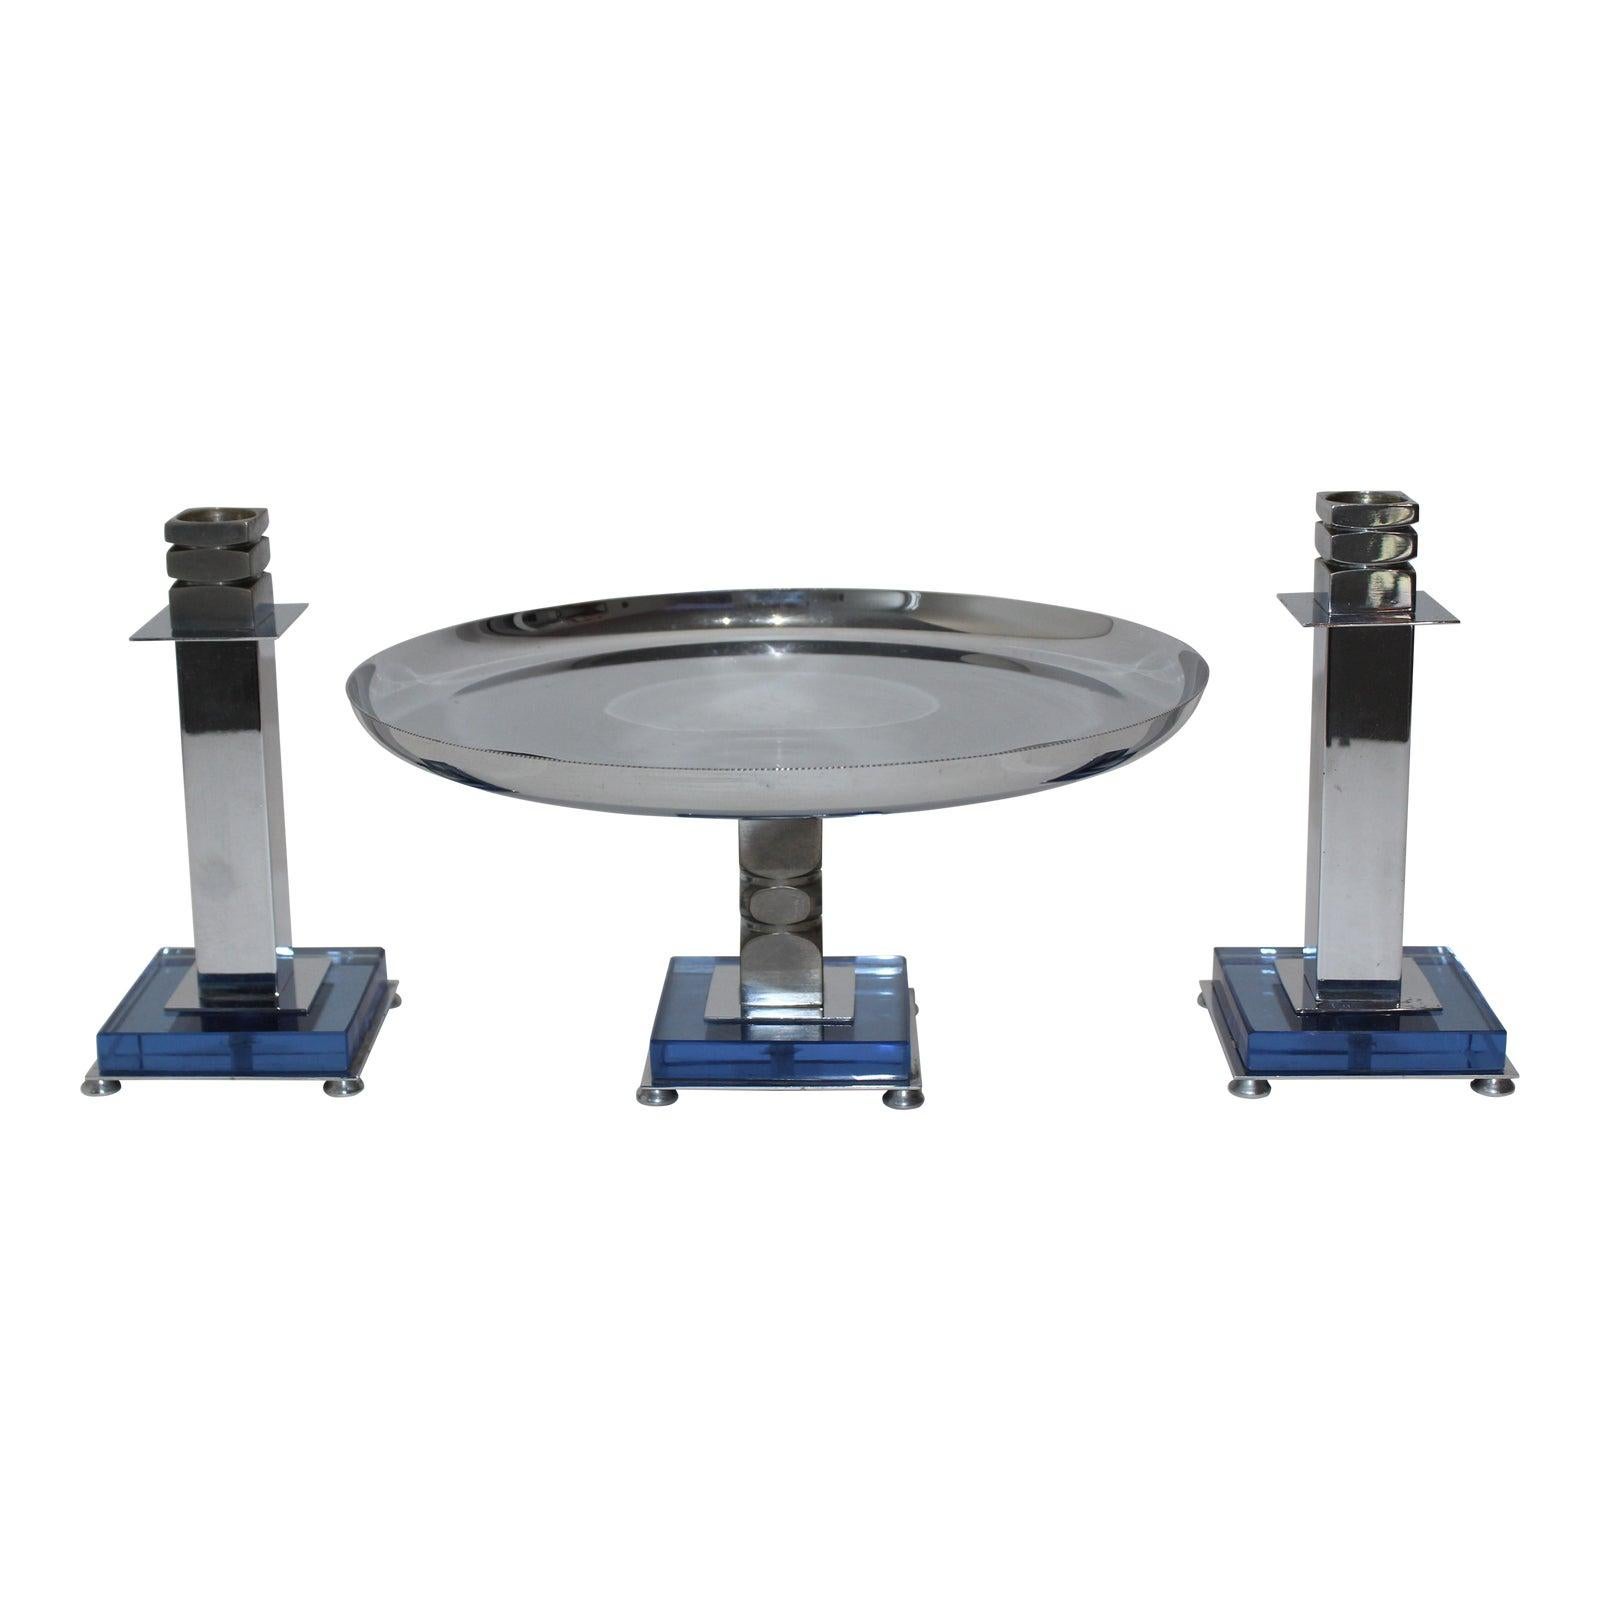 Art Deco 1930s blue glass and chrome Farber Garniture set - Compote and 2 candlesticks - set of 3 from a Palm Beach Estate. An early design by what was to become an iconic Art Deco brand, and a beautiful example -- note the exquisite beaded edge of